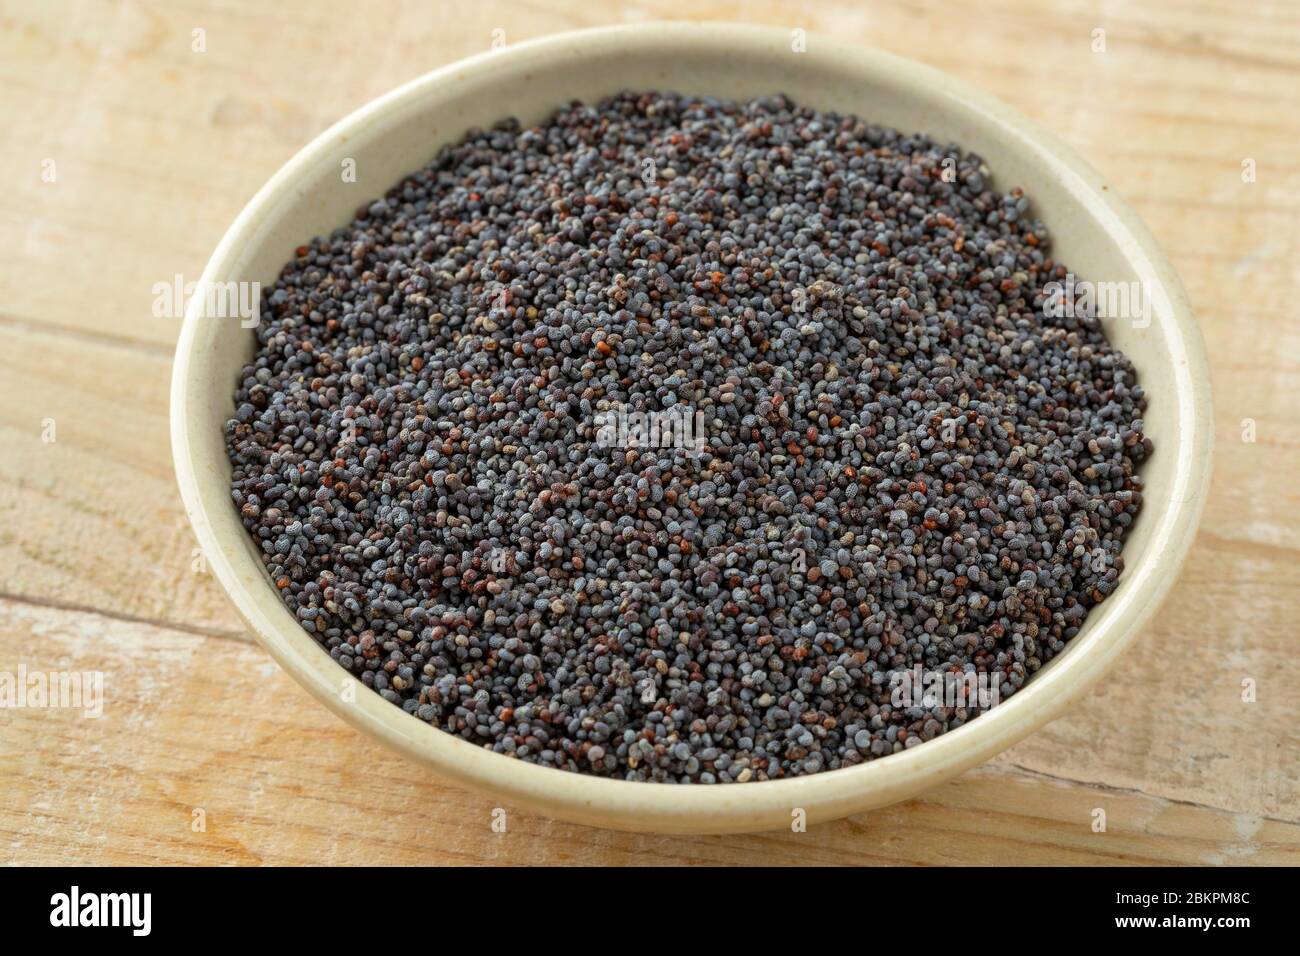 Bowl with black poppy seed as an ingredient Stock Photo